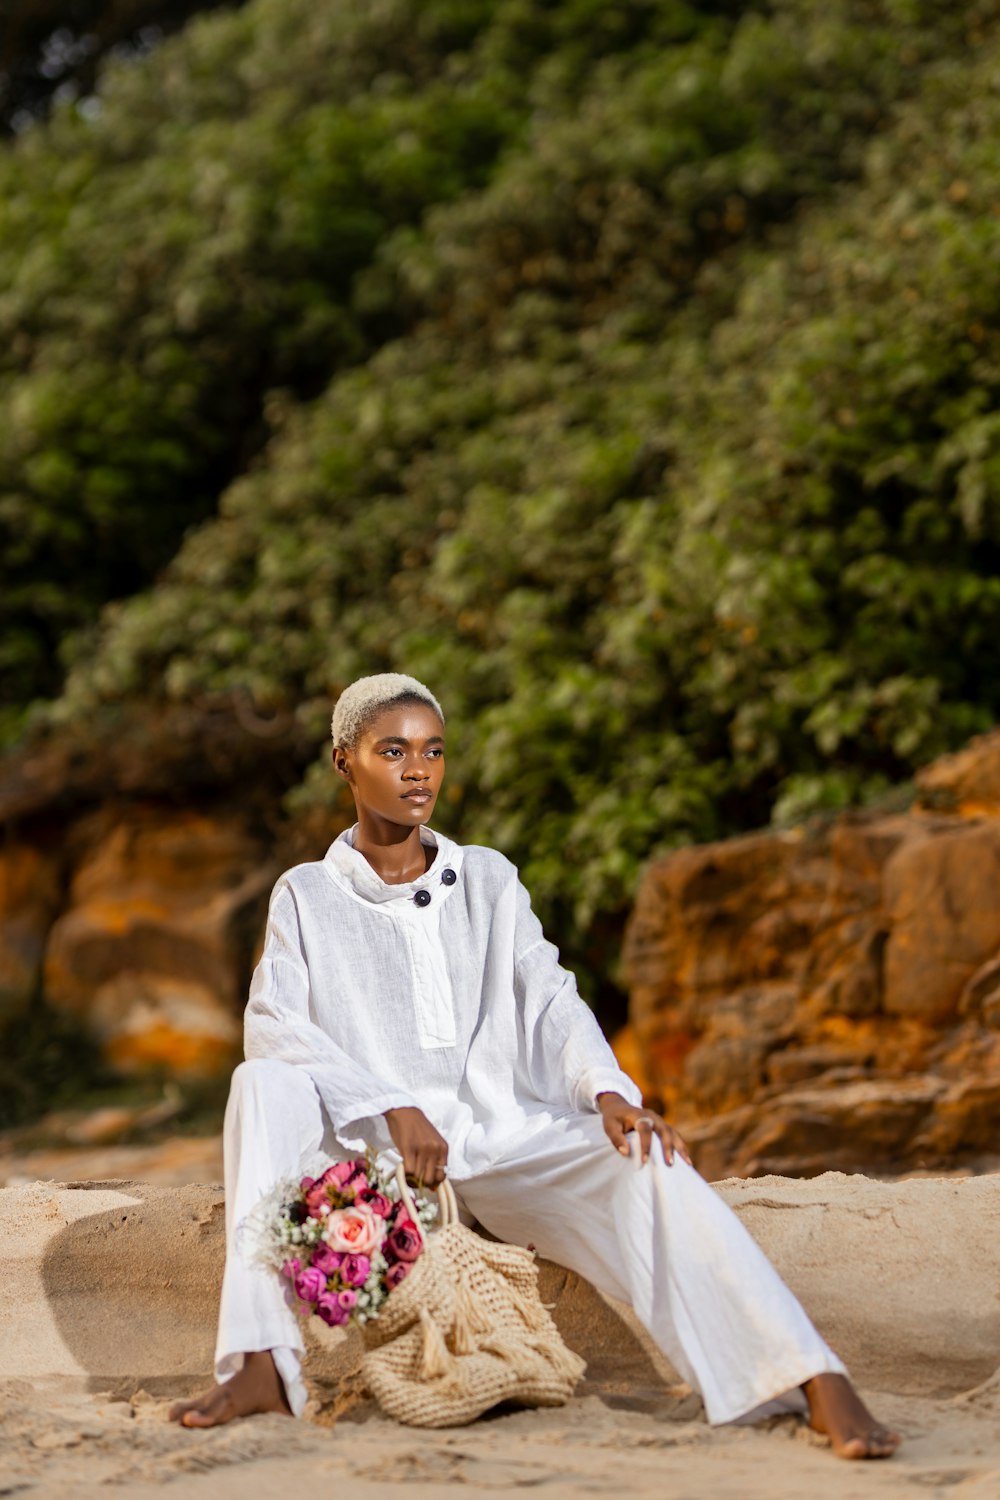 a woman sitting on a beach with a basket of flowers